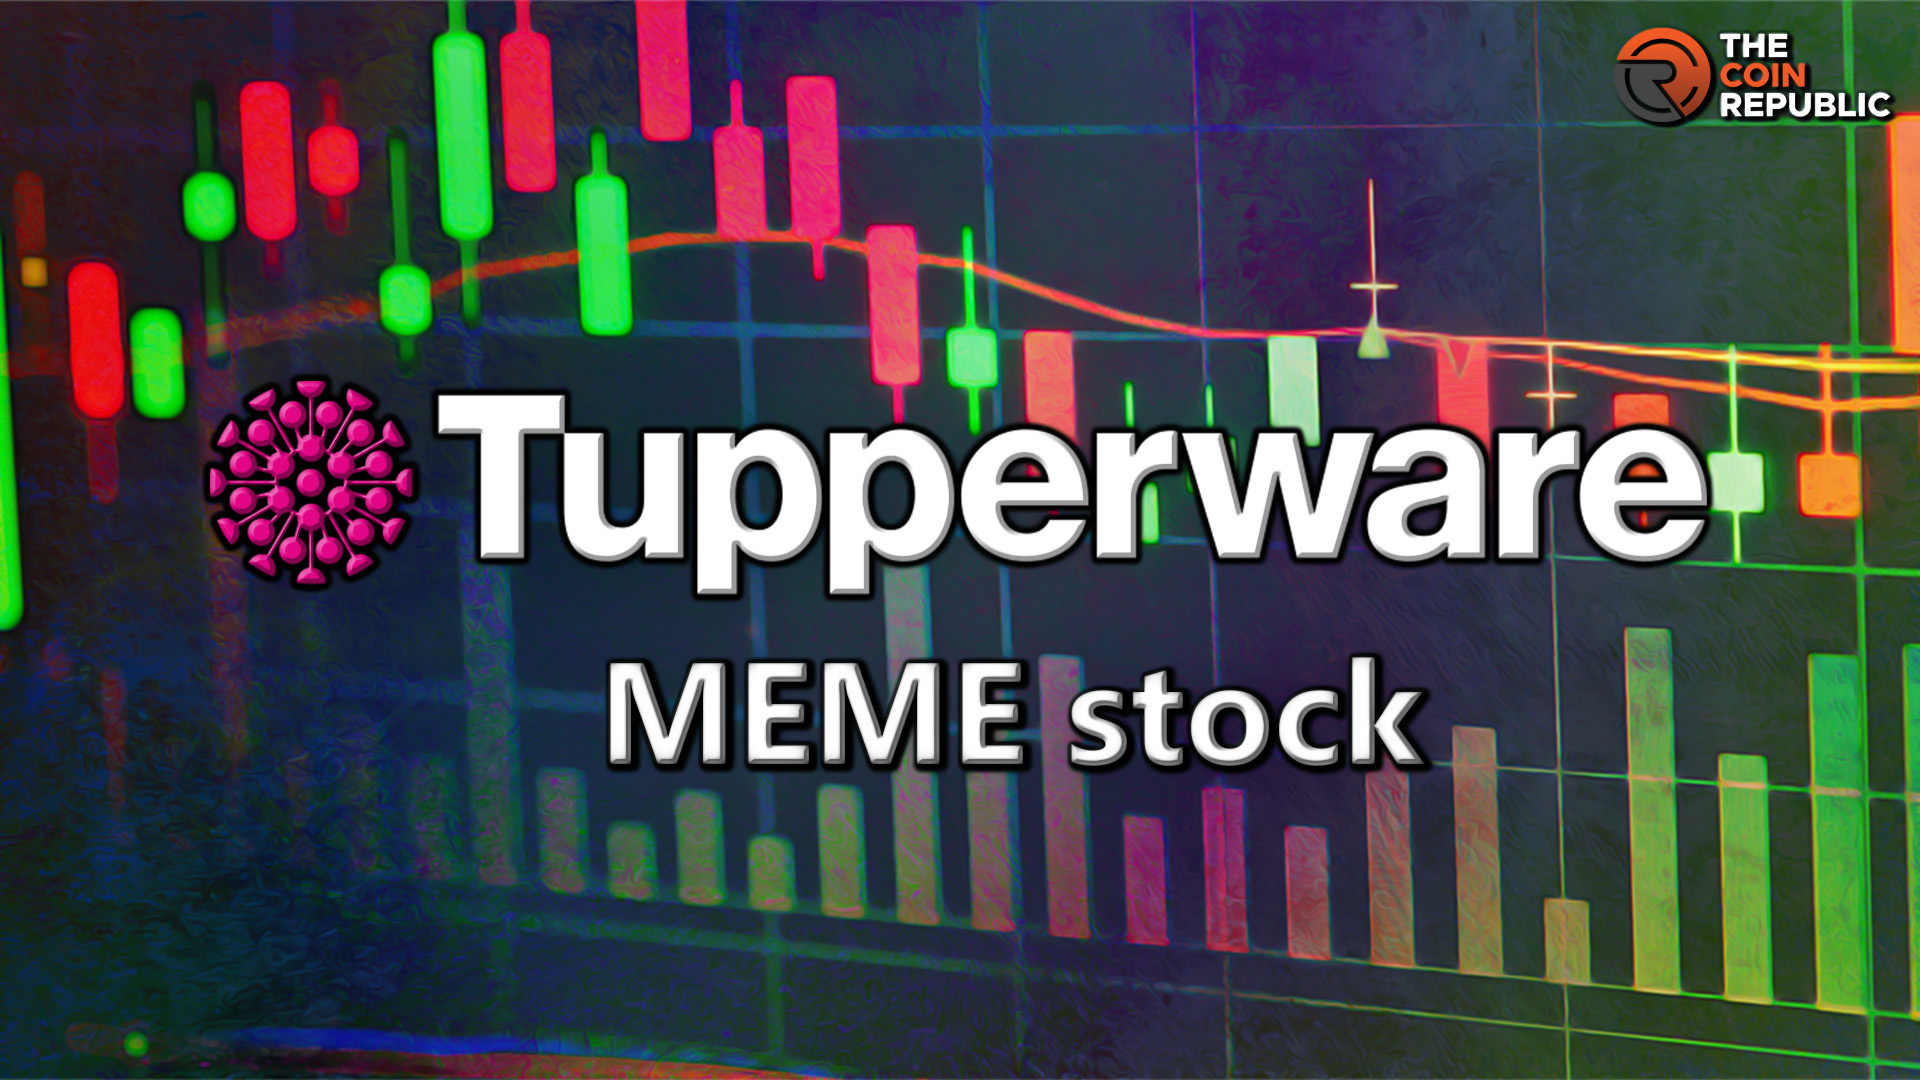 Tupperware (TUP) Stock Became The Latest Meme Stock, Find Why?